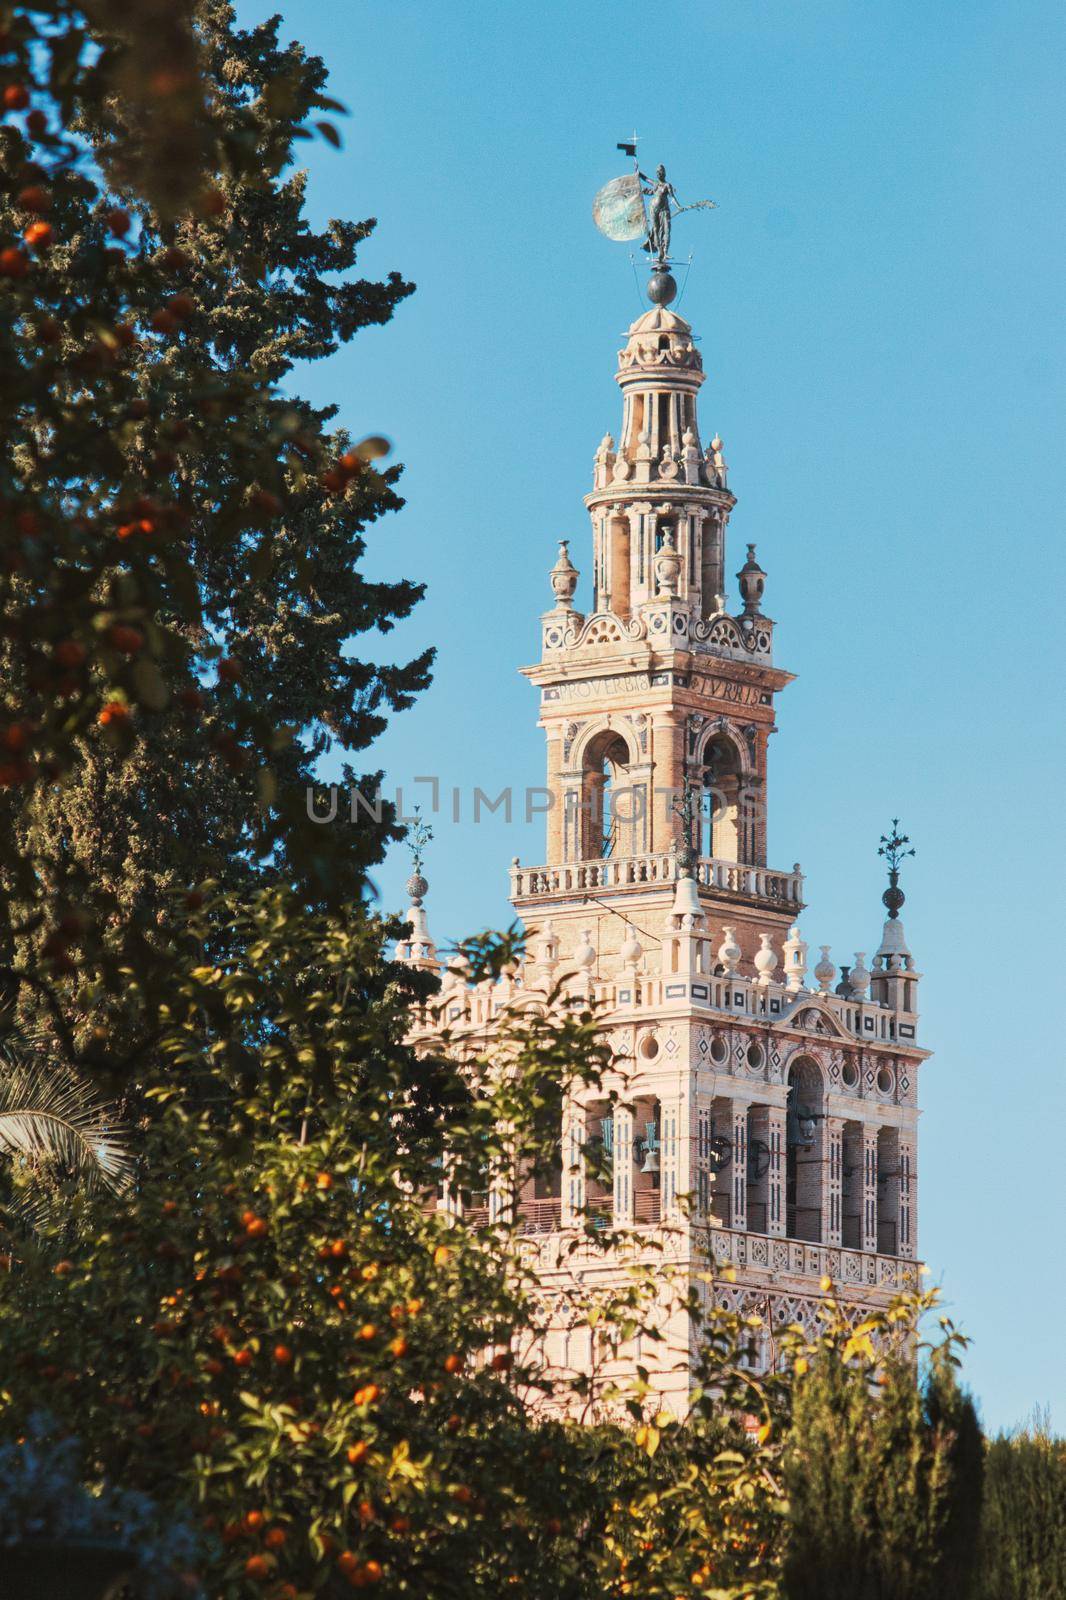 Vertical shot of the Giralda bell tower, part of the cathedral in Seville, Spain - taken from the Real Alcazar royal gardens